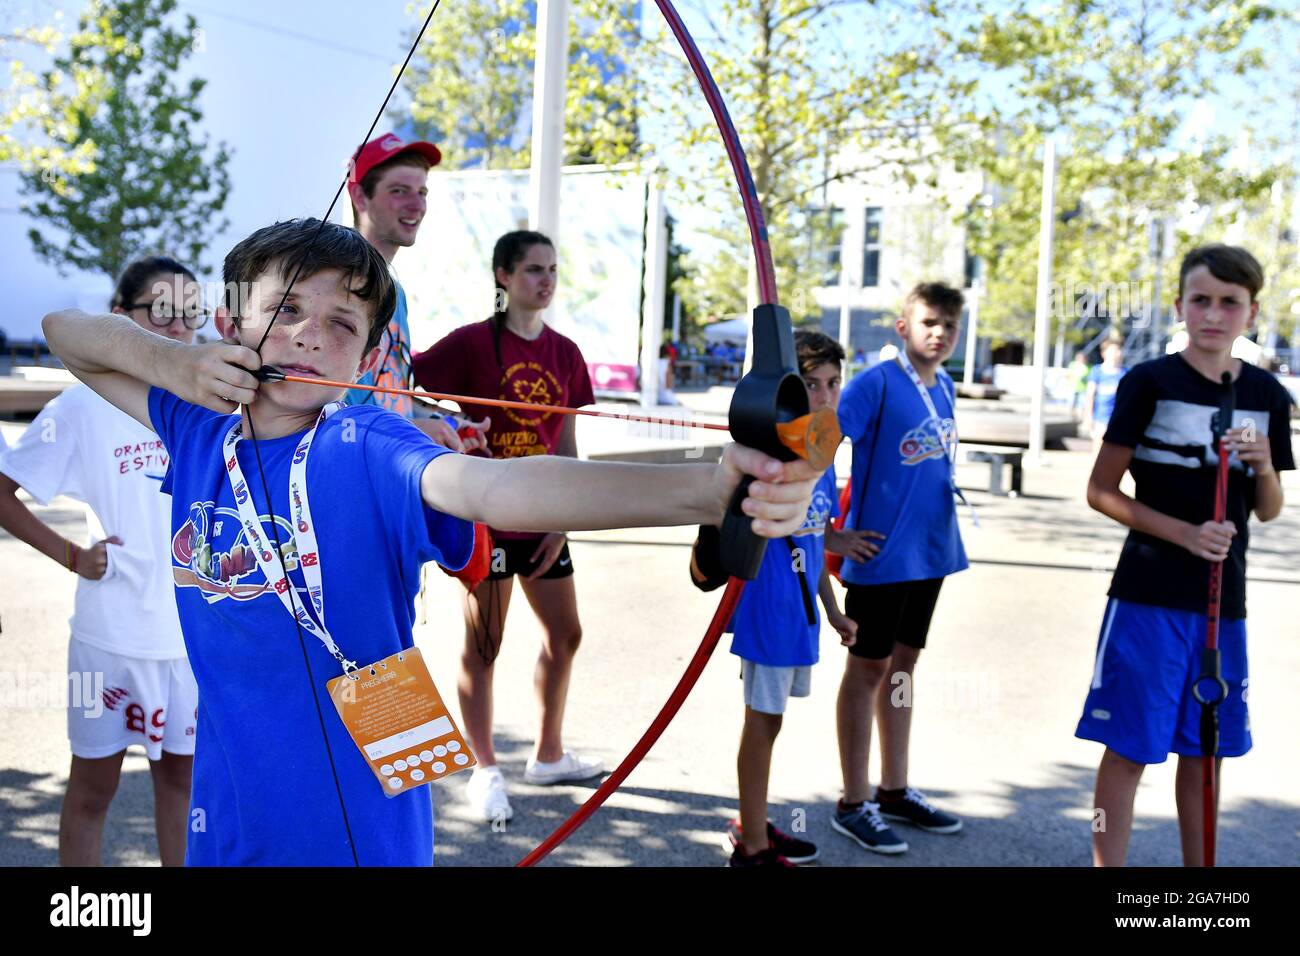 Archery sport lesson, during a sports summer camp, in Milan. Stock Photo